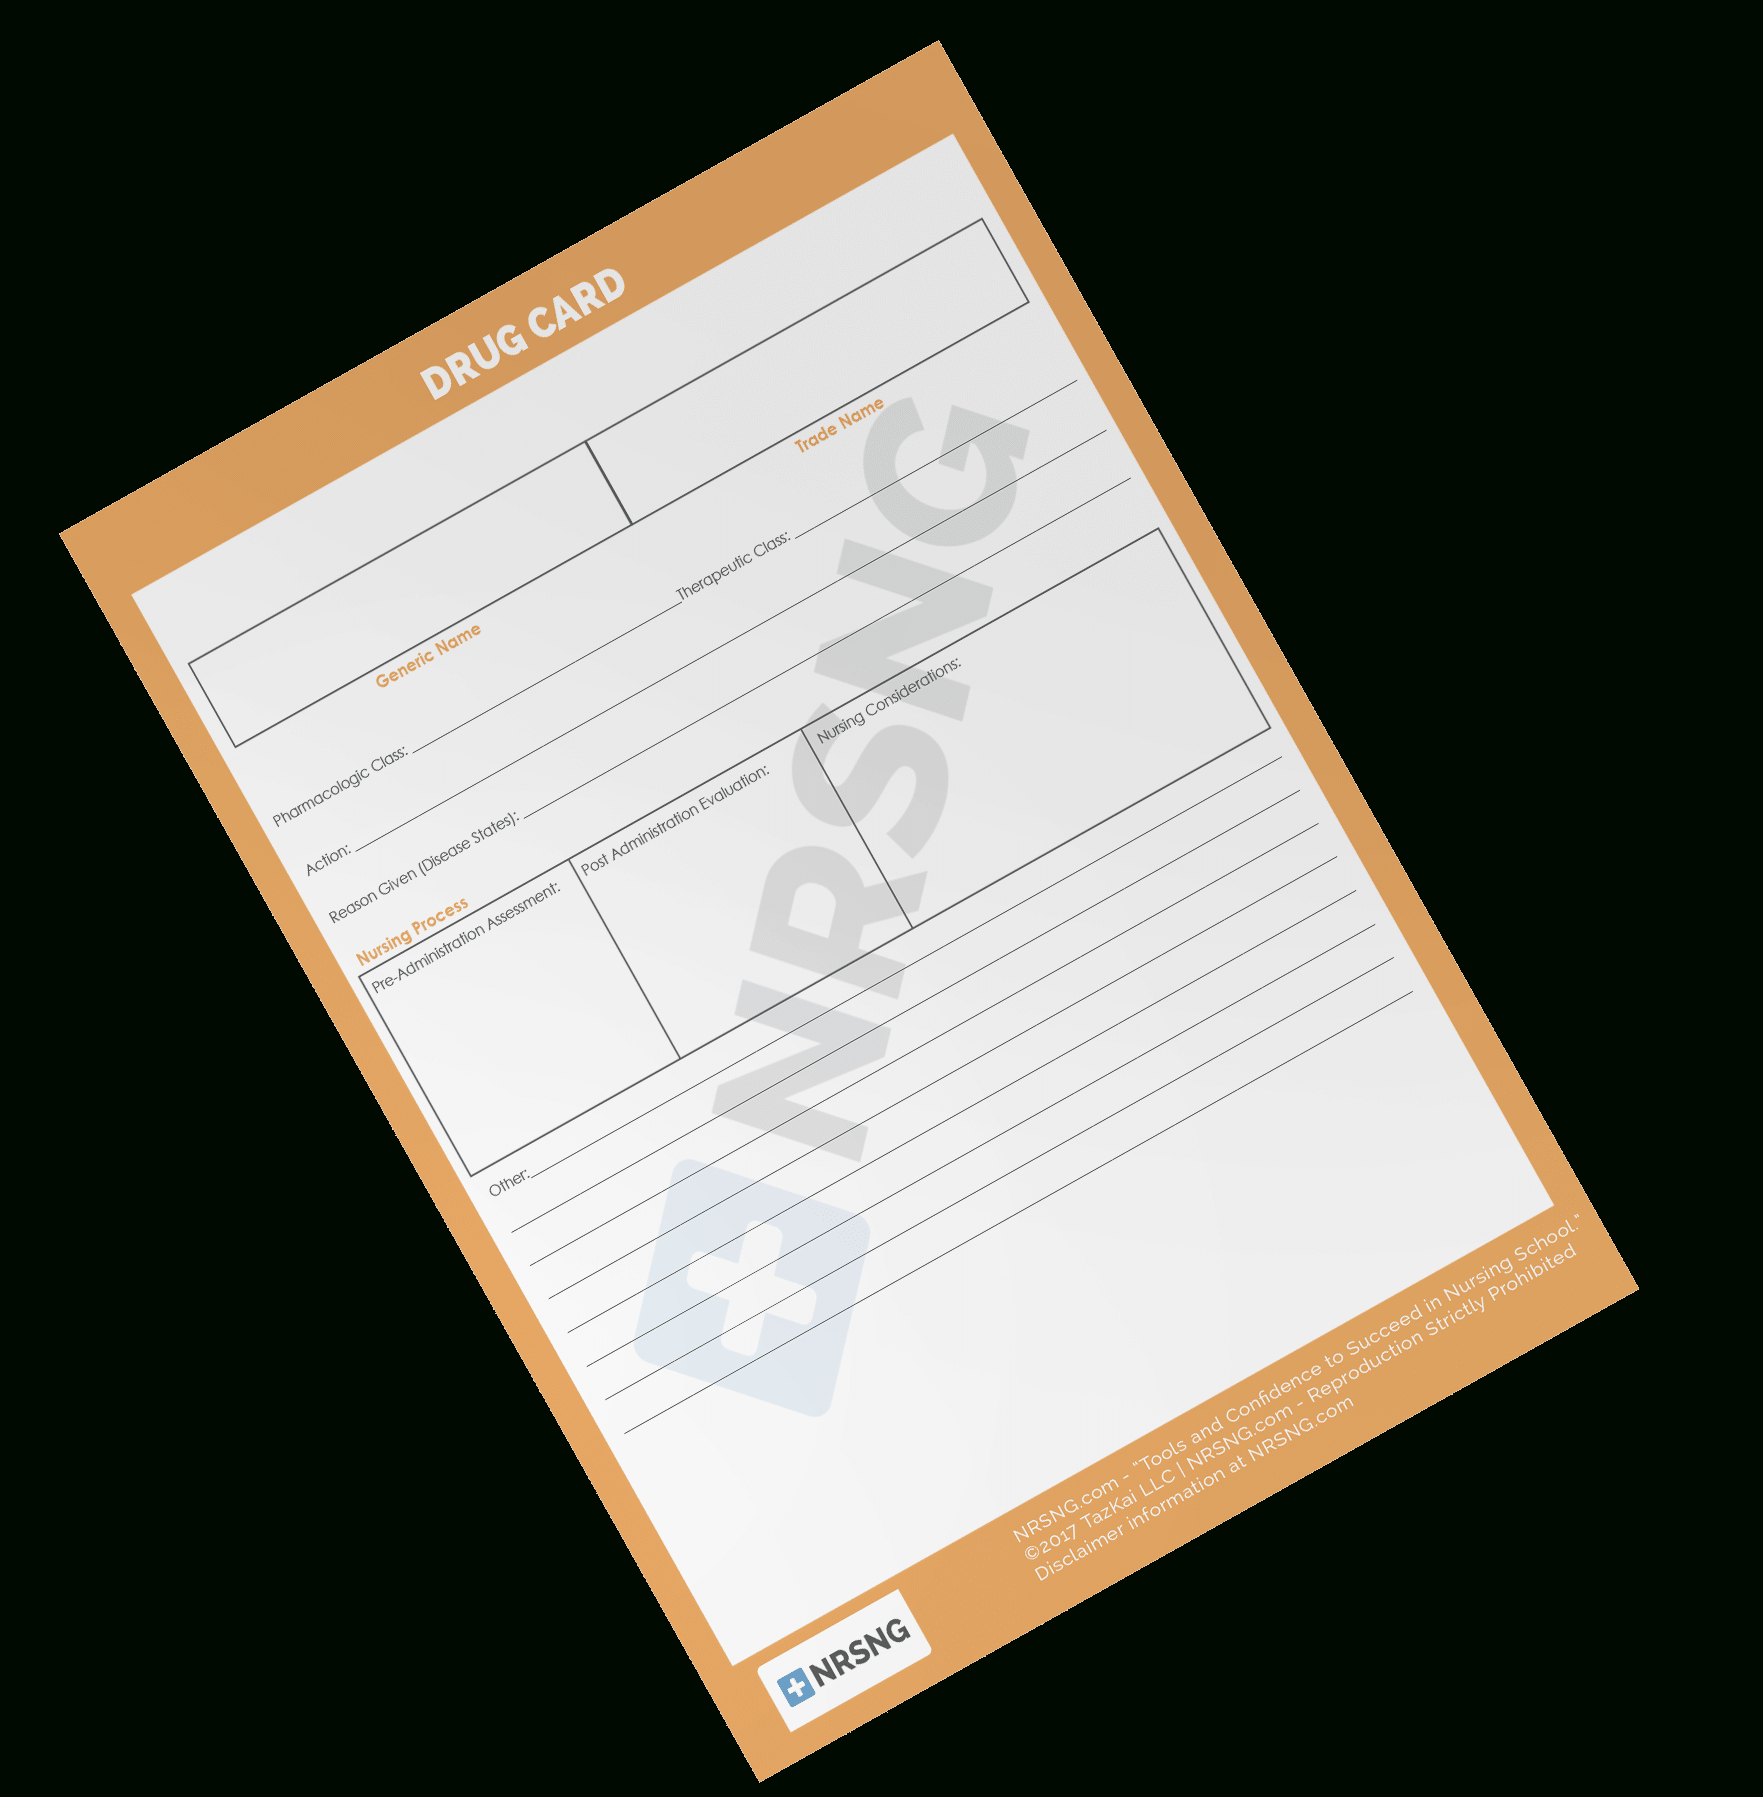 Drug Card Template | Nrsng Pertaining To Pharmacology Drug Card Template